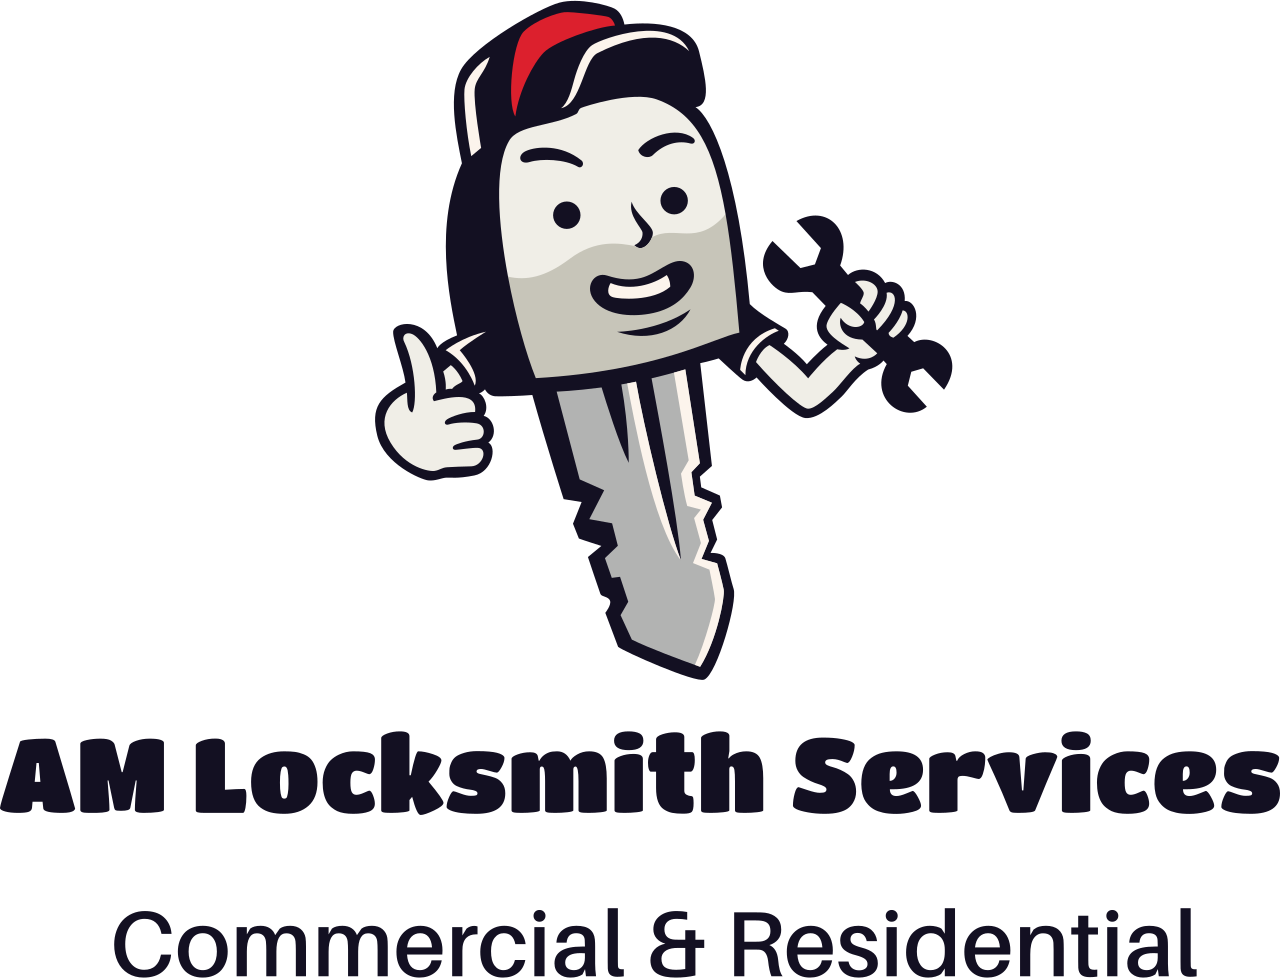 AM Locksmith Services's web page